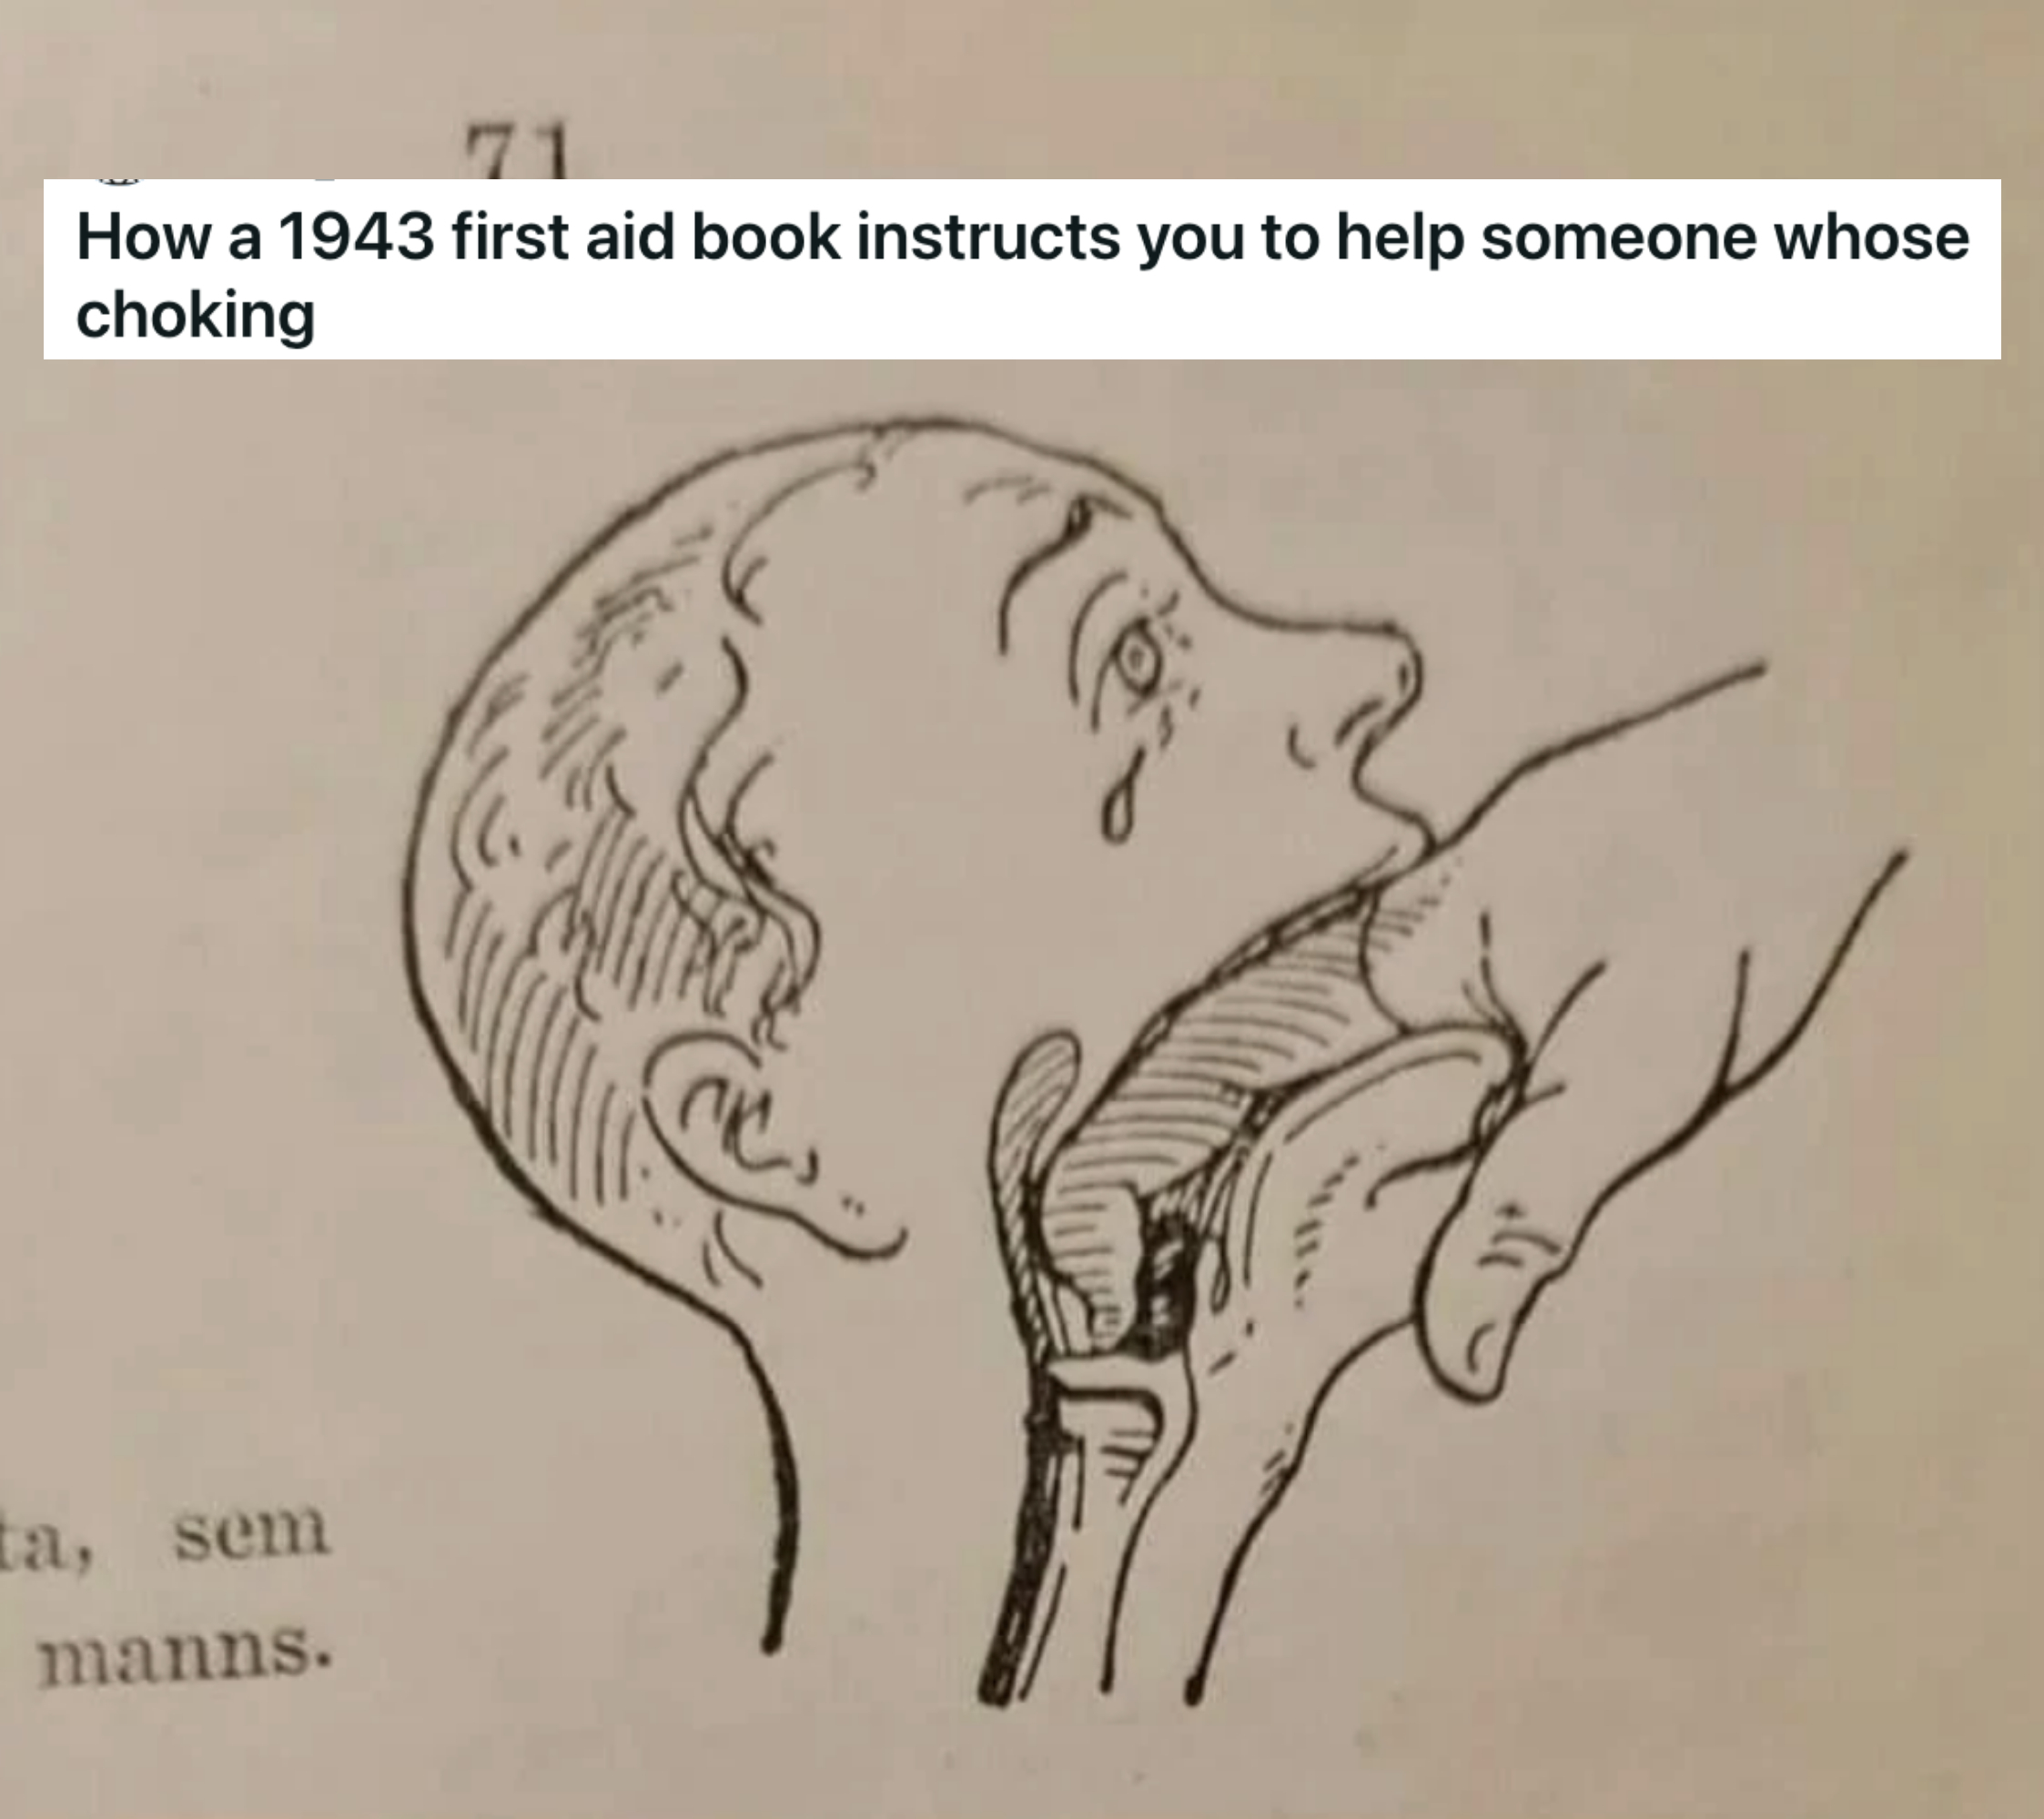 &quot;How a 1943 first aid book instructs you to help someone whose choking&quot;